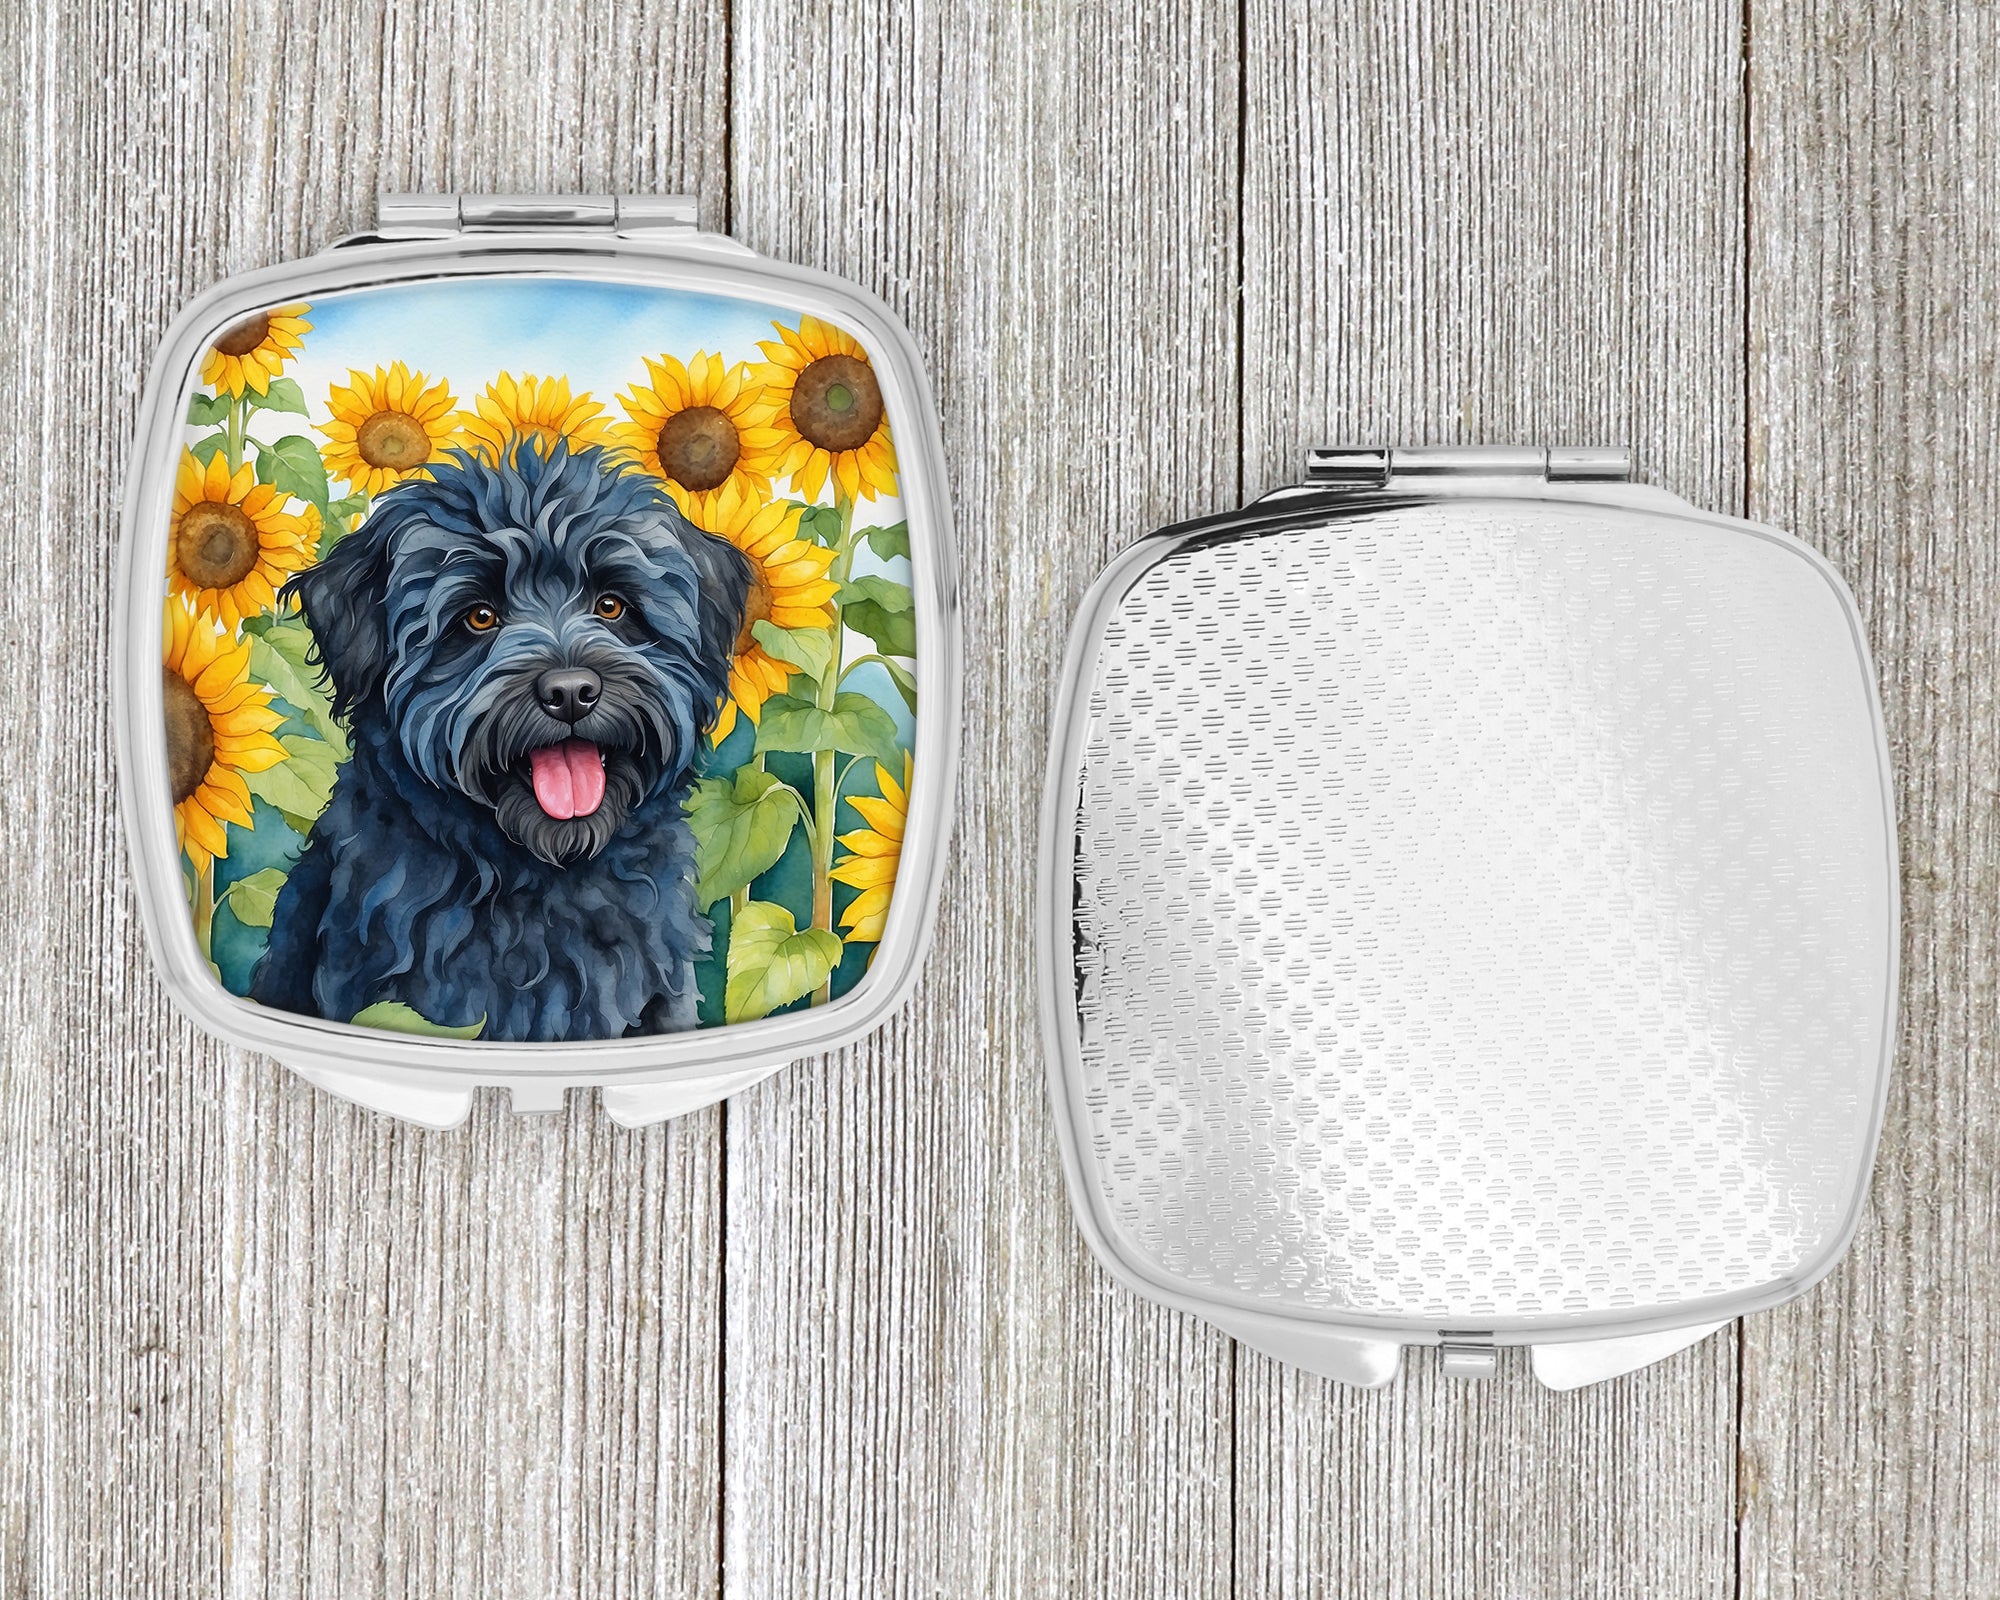 Puli in Sunflowers Compact Mirror